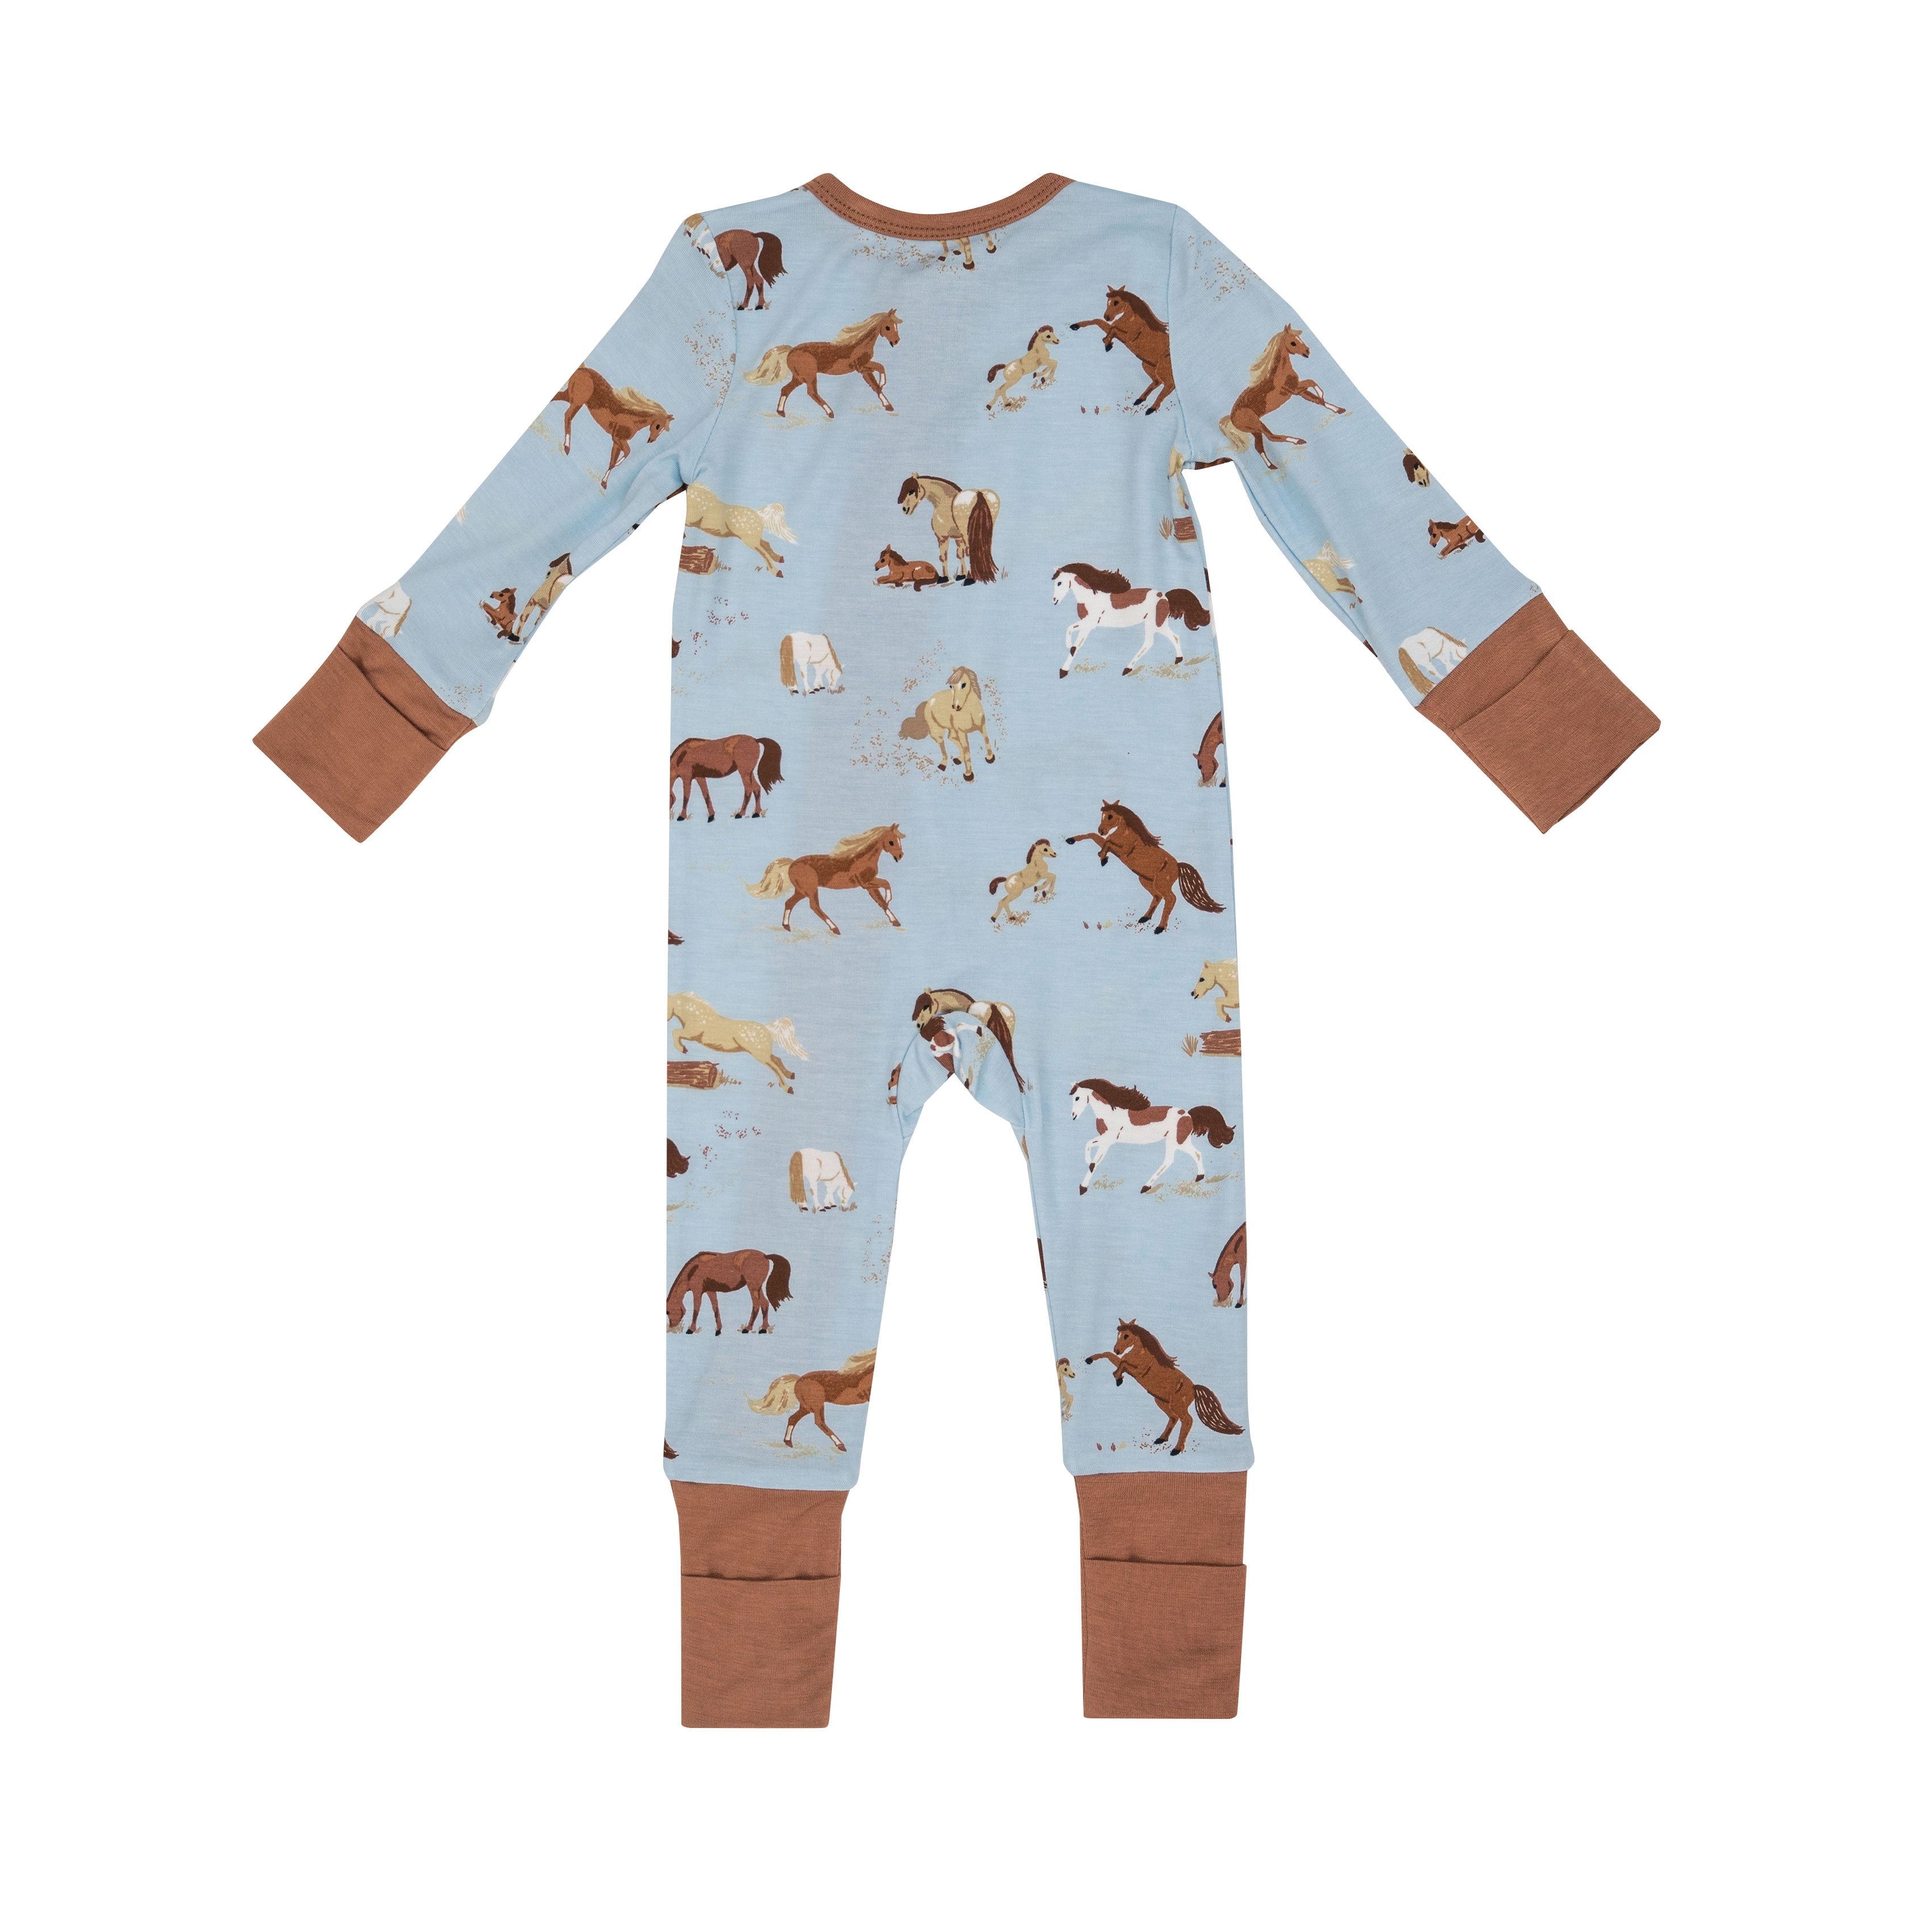 back of blue zipper romper with brown cuffs at the wrists and ankles and brown horses print